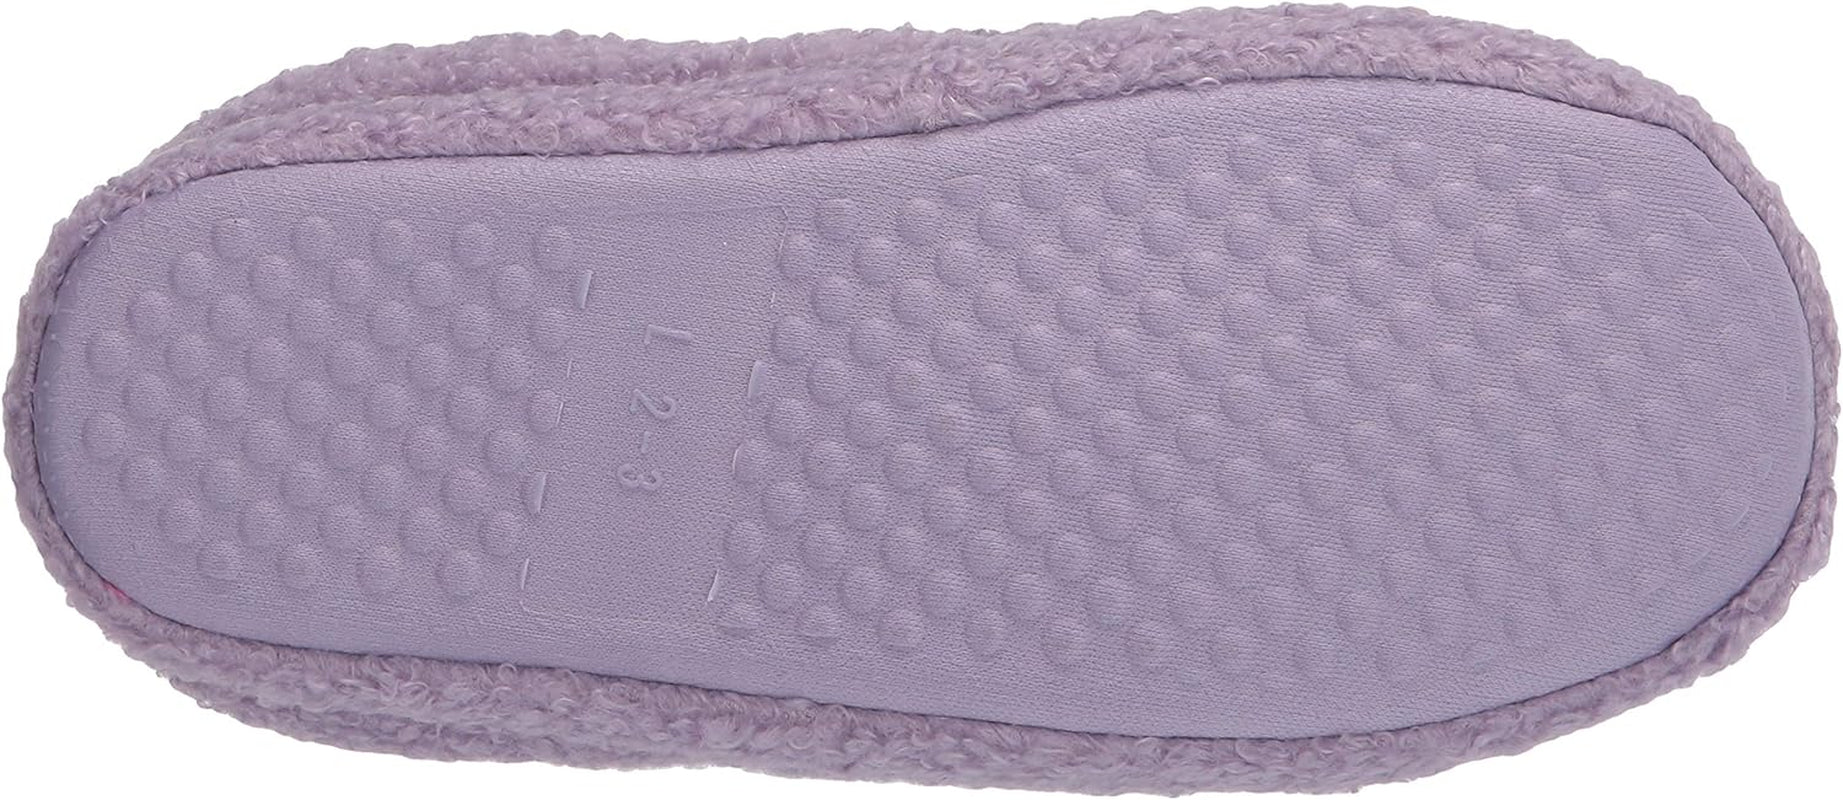 Girls Slip-On Clogs - Fuzzy Comfy Warm Memory Foam Sherpa Slippers with Satin Bow